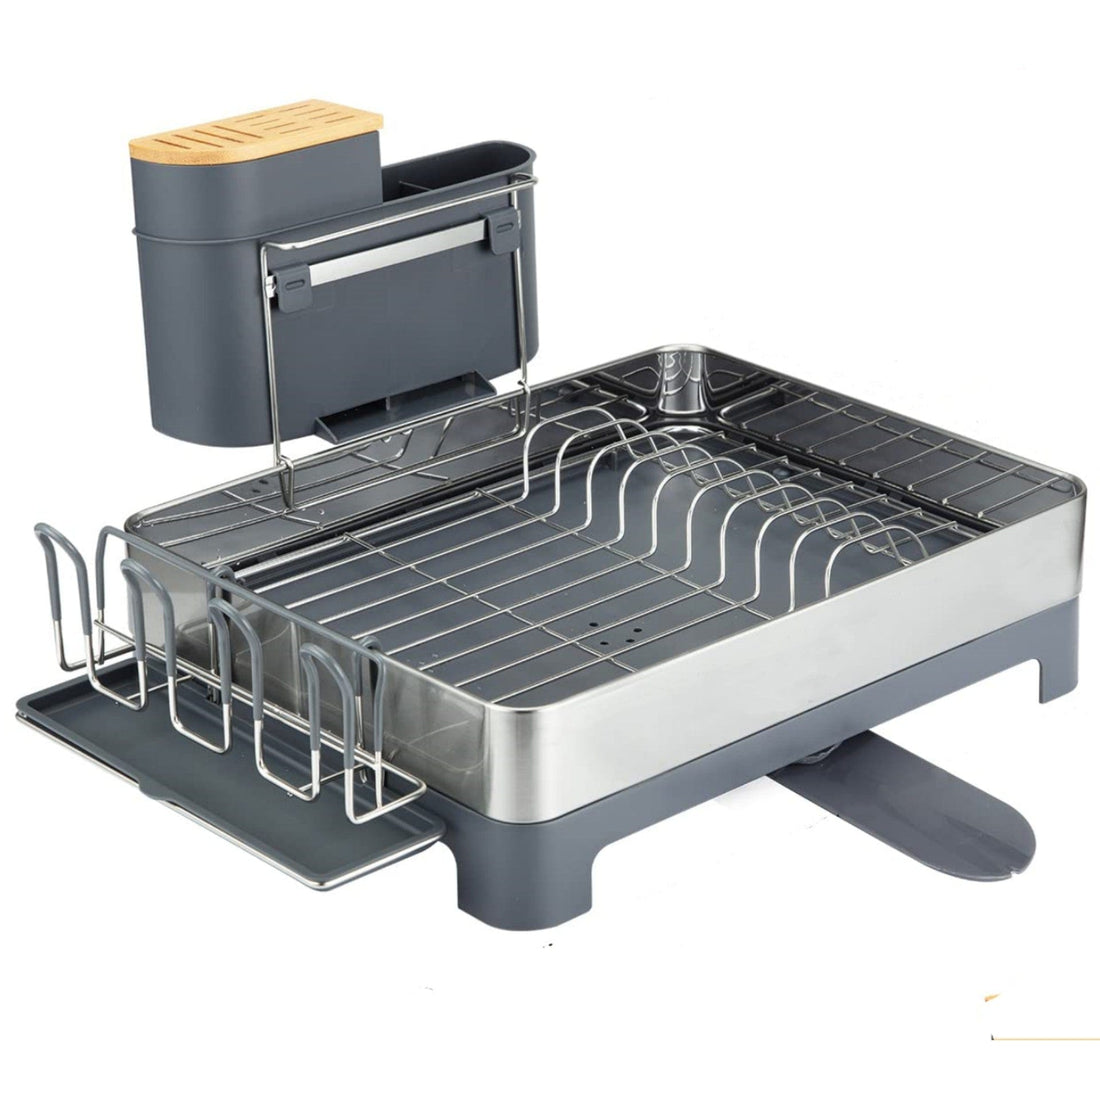 Dish Drying Rack Stainless Steel Dish Rack Drainers for Kitchen Counter